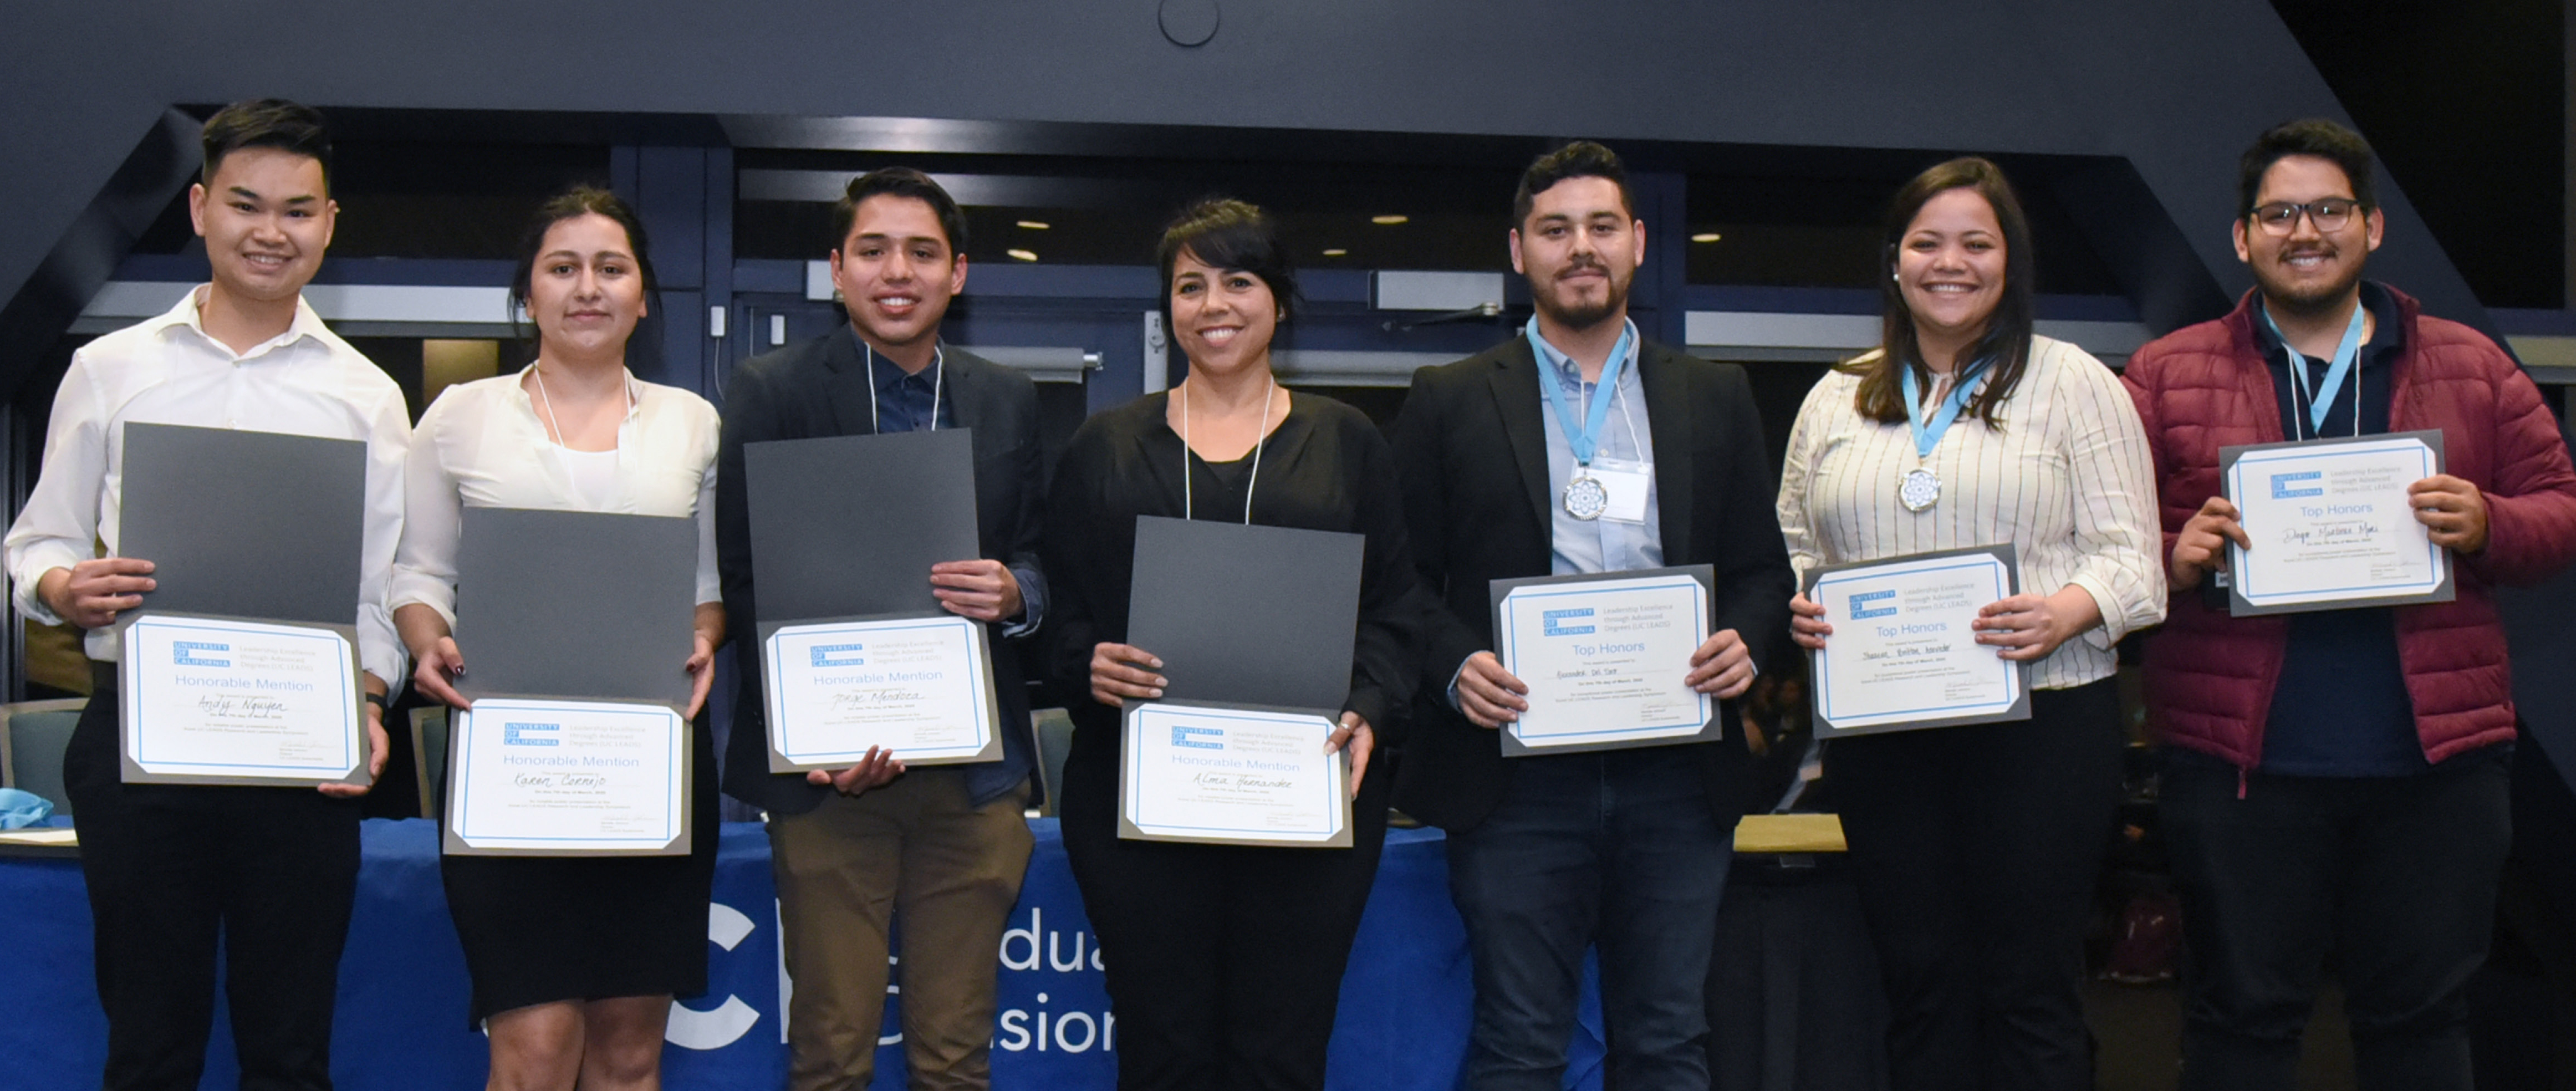 Poster award presentations at the 2020 UC LEADS Symposium at UC Irvine